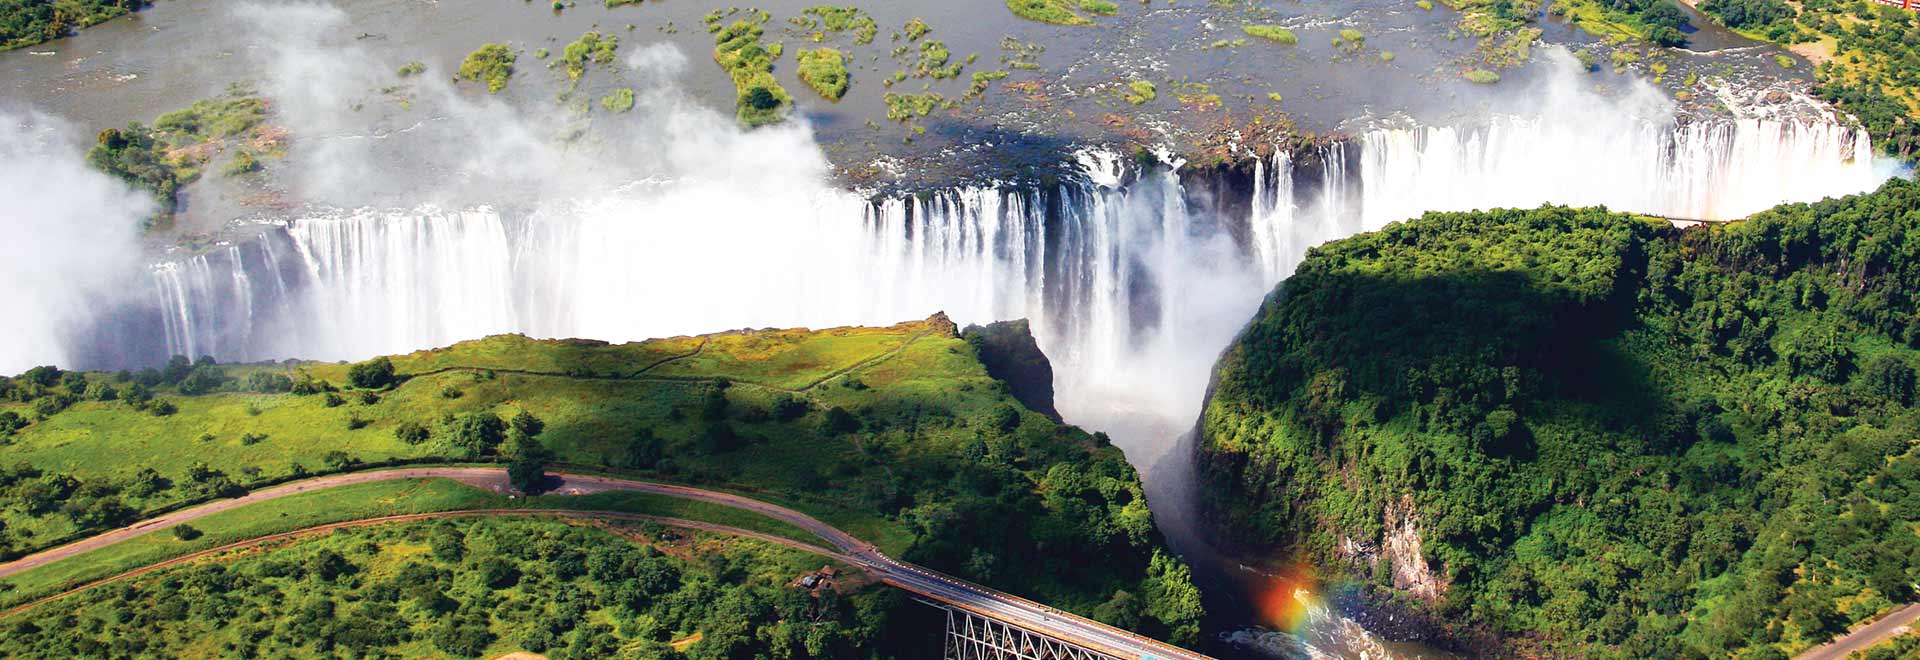 Africa South Africa Victoria Falls MH